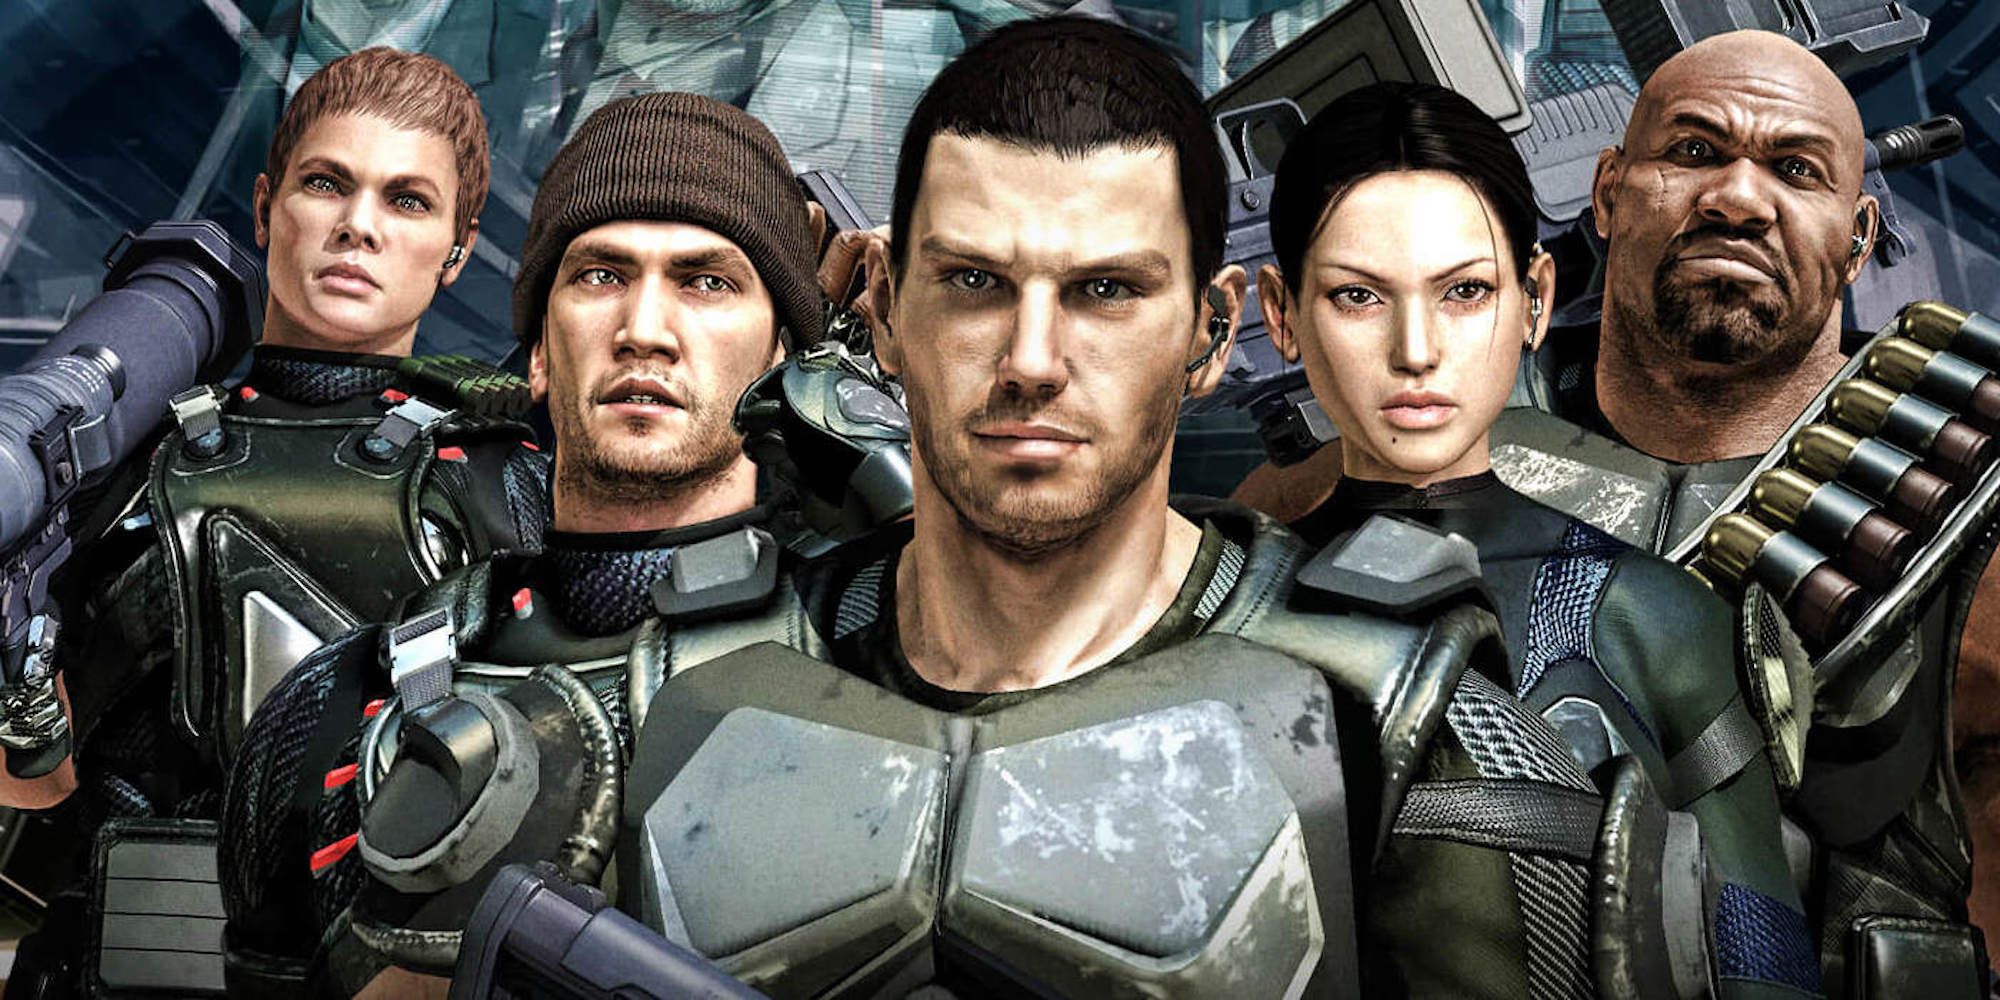 Promo art featuring characters in Binary Domain